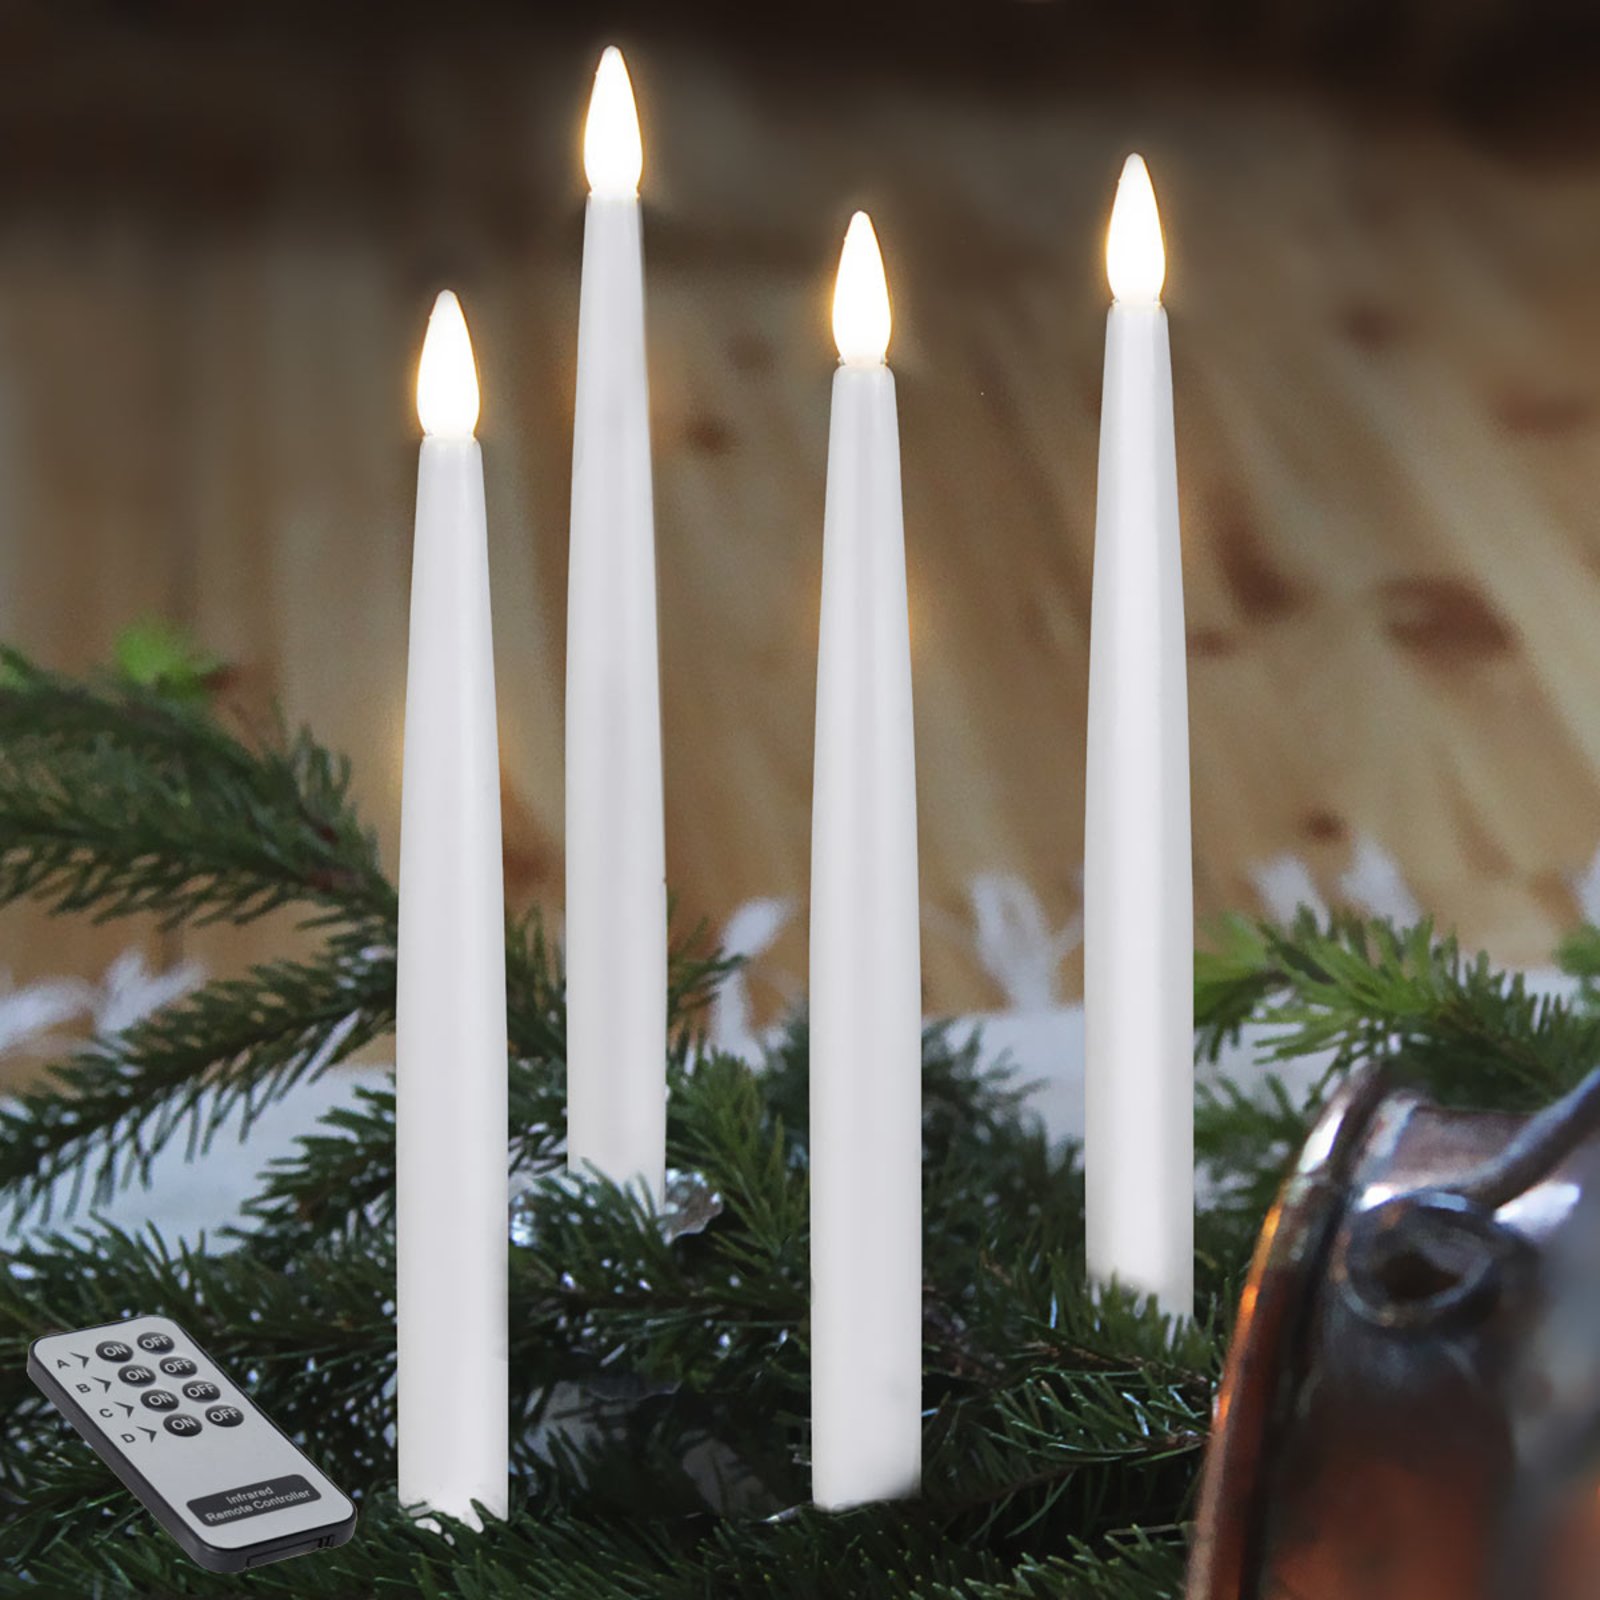 Long LED Christmas candles, set of 4, indoors